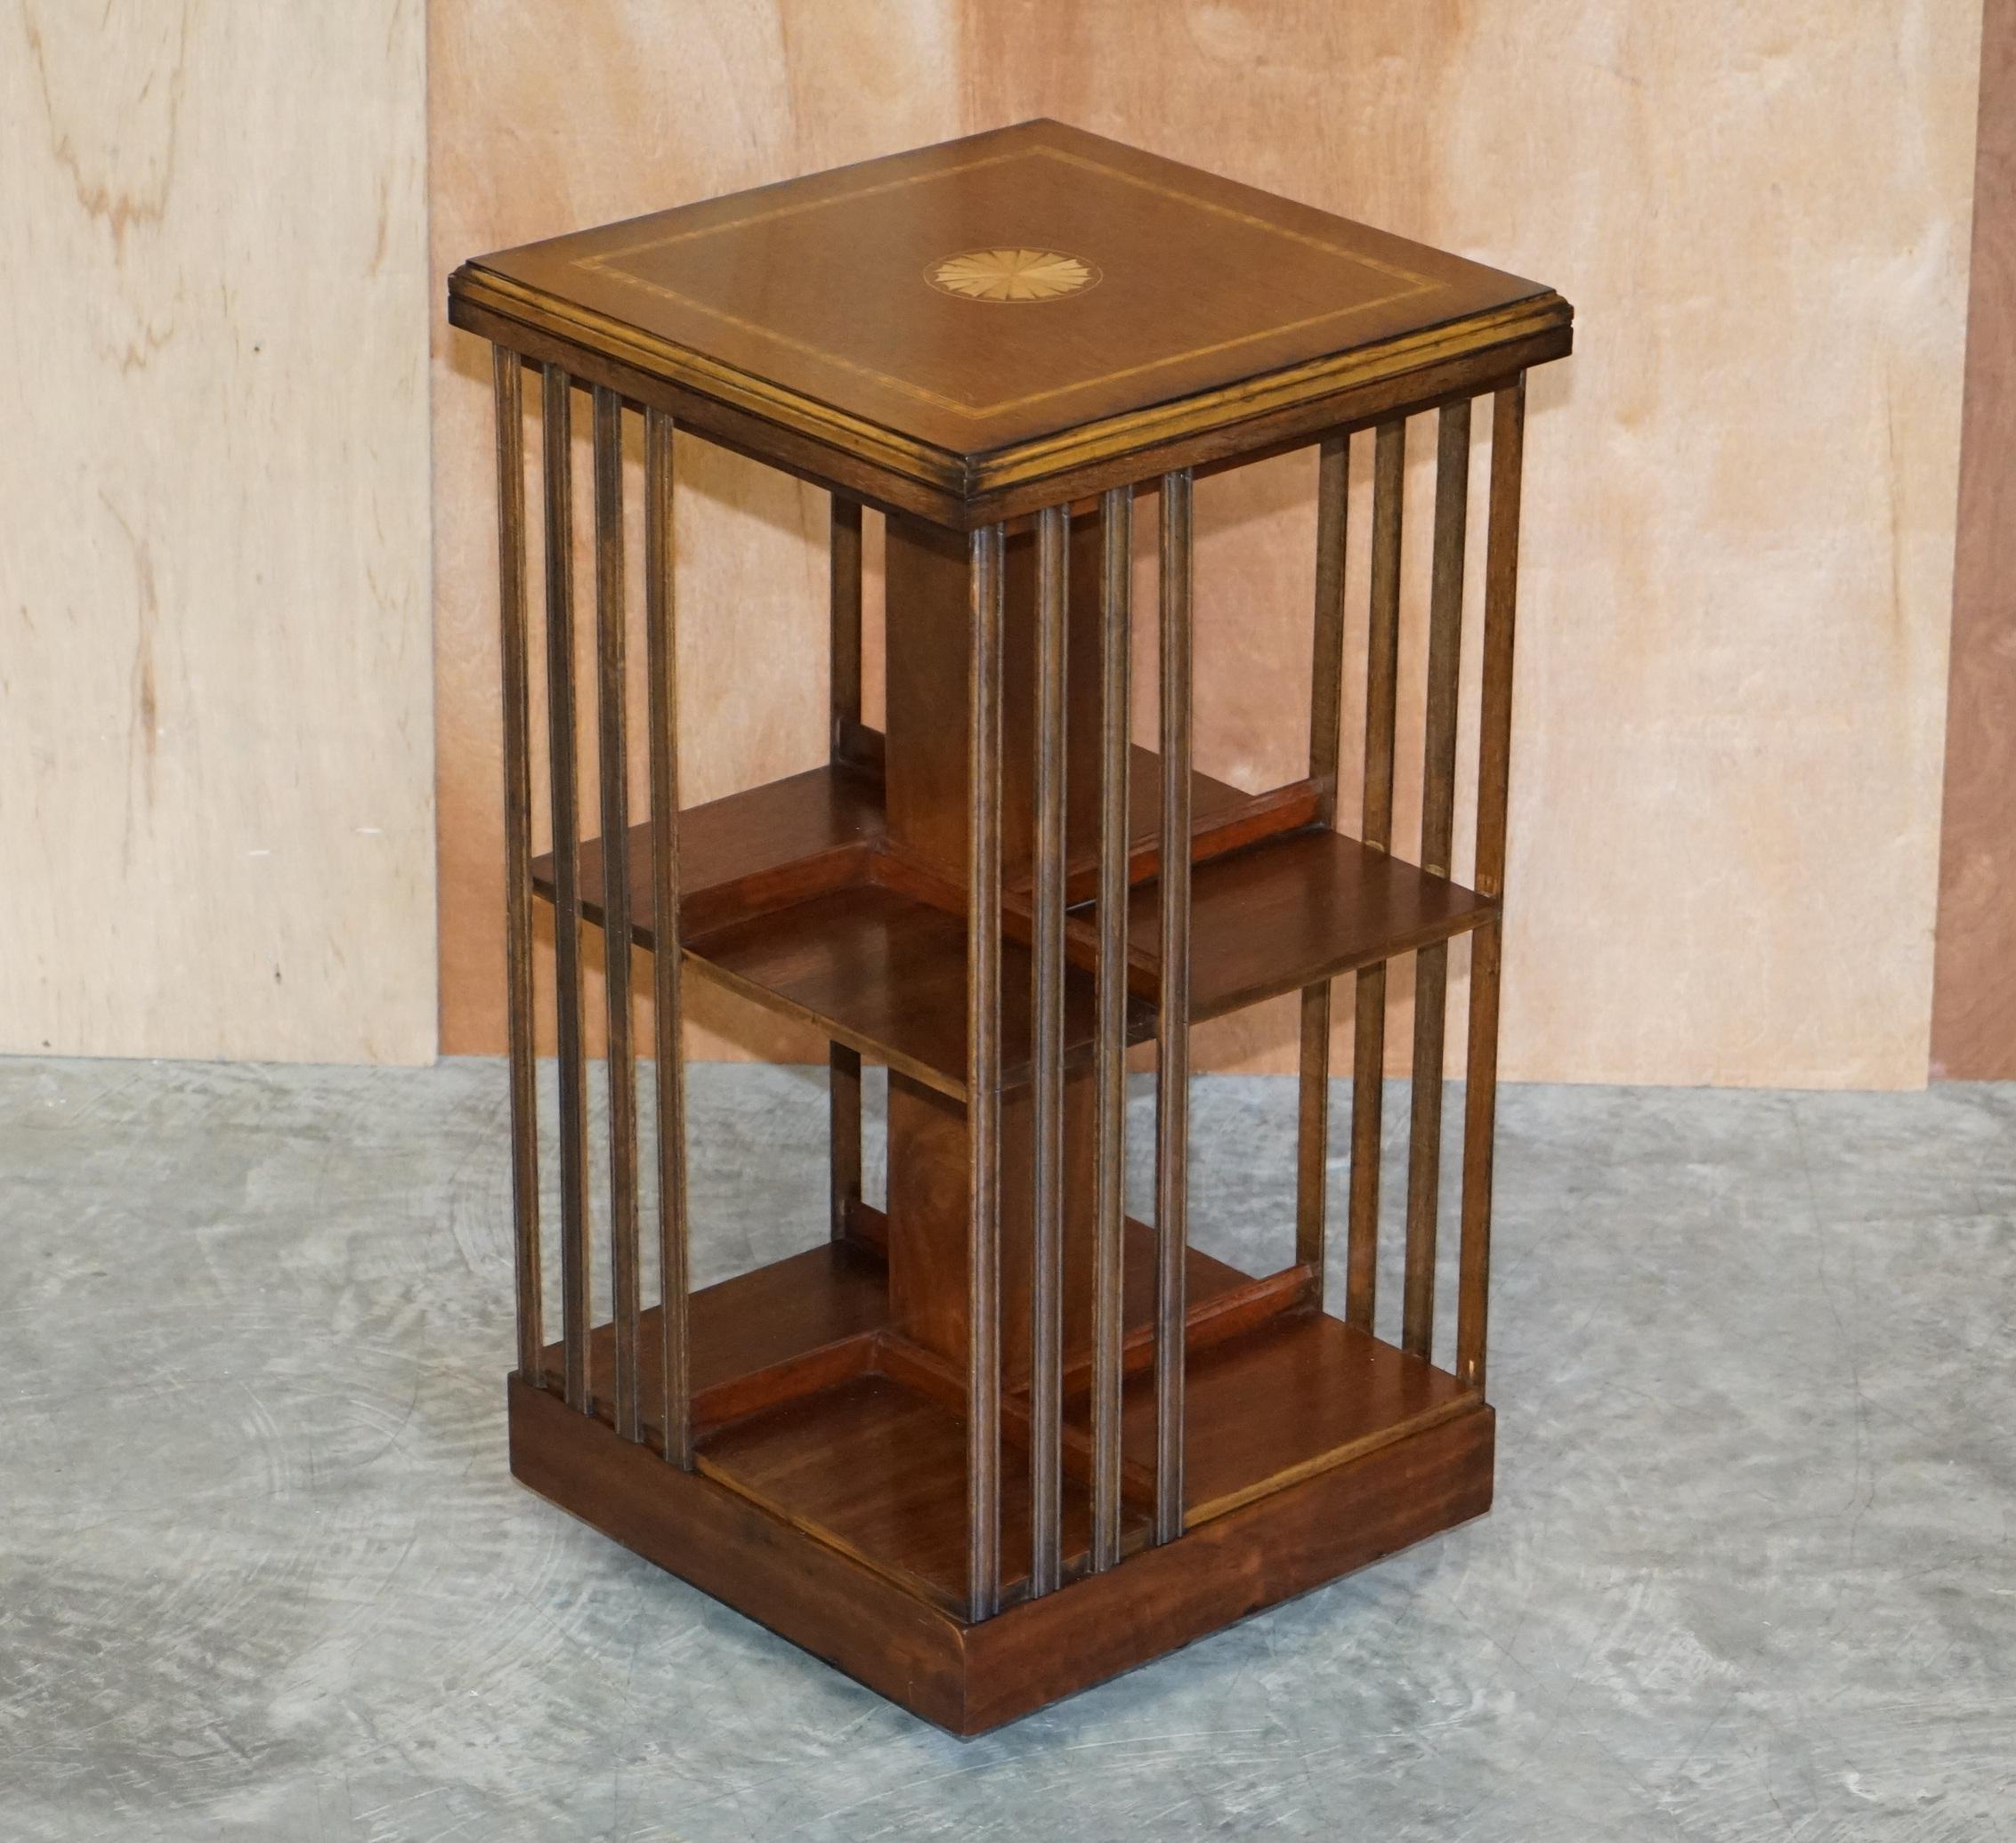 We are delighted to offer for sale this stunning vintage Sheraton Revival mahogany & Satinwood revolving bookcase table

A very good looking well made and decorative piece. Made in the Sheraton revival style with wonderful inlay and extremely